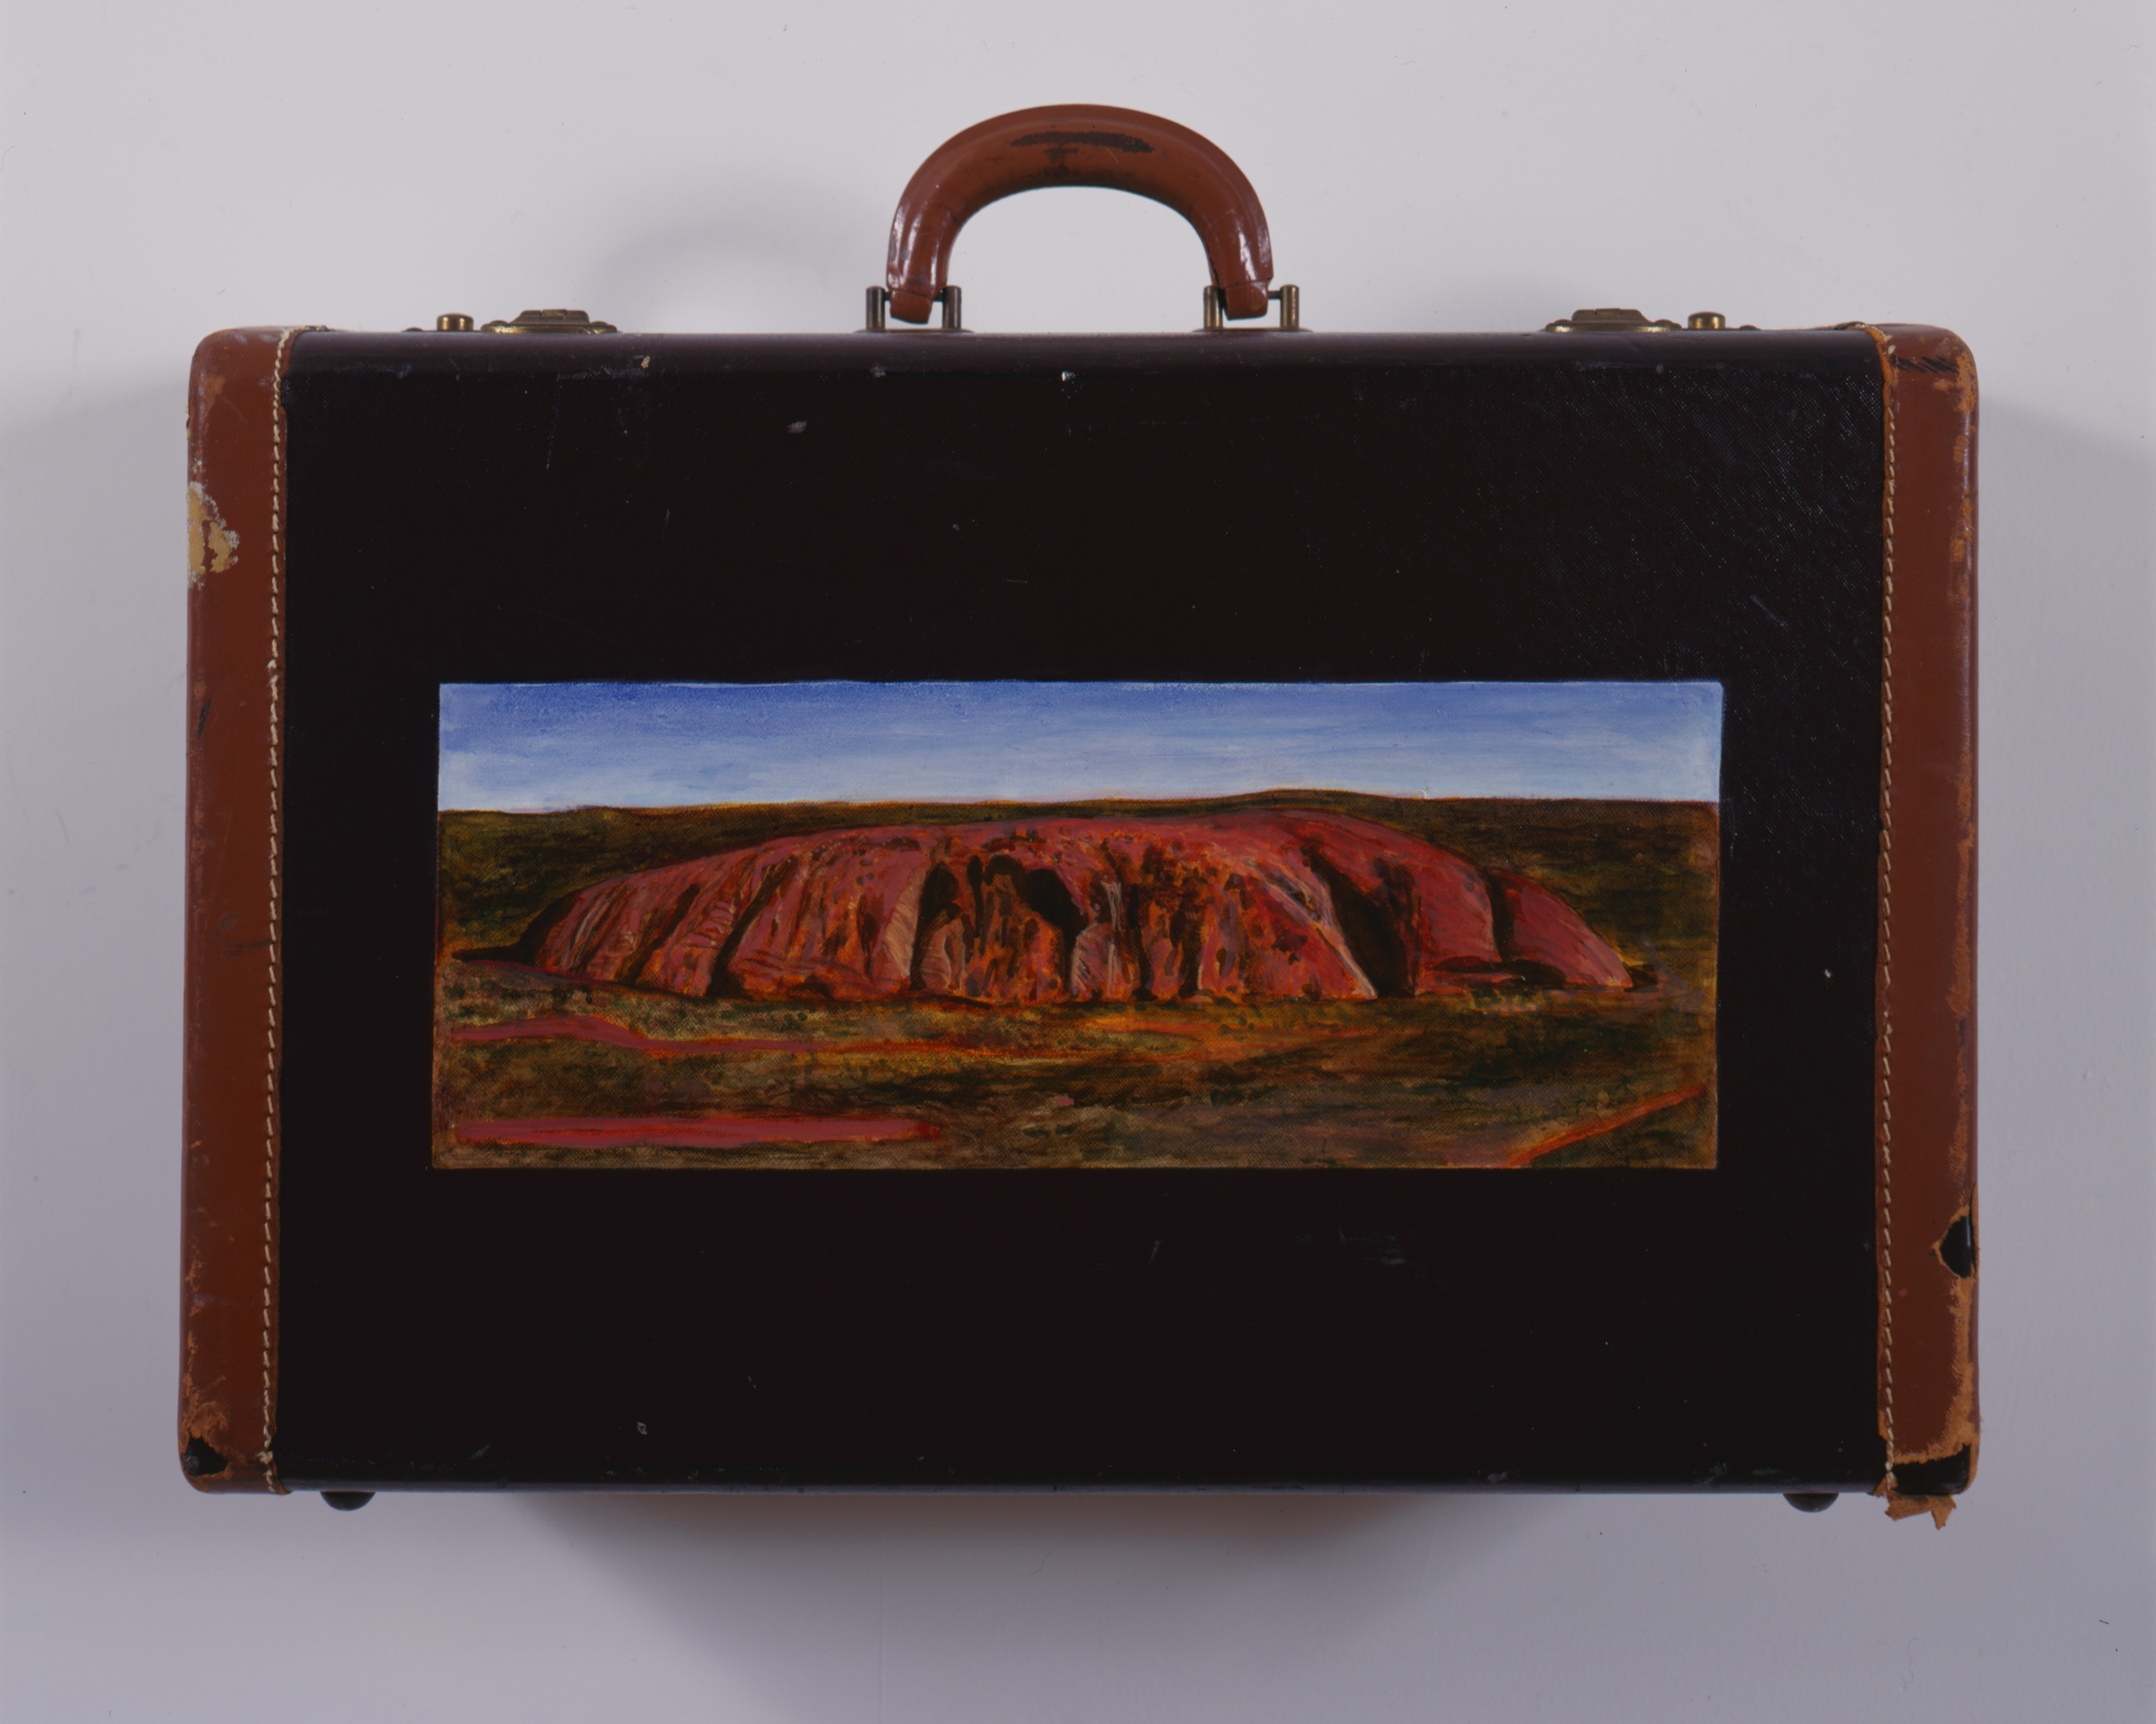 Image of artwork Ayers Rock from the series “Spiritual Tourists” by Pam Goldblum